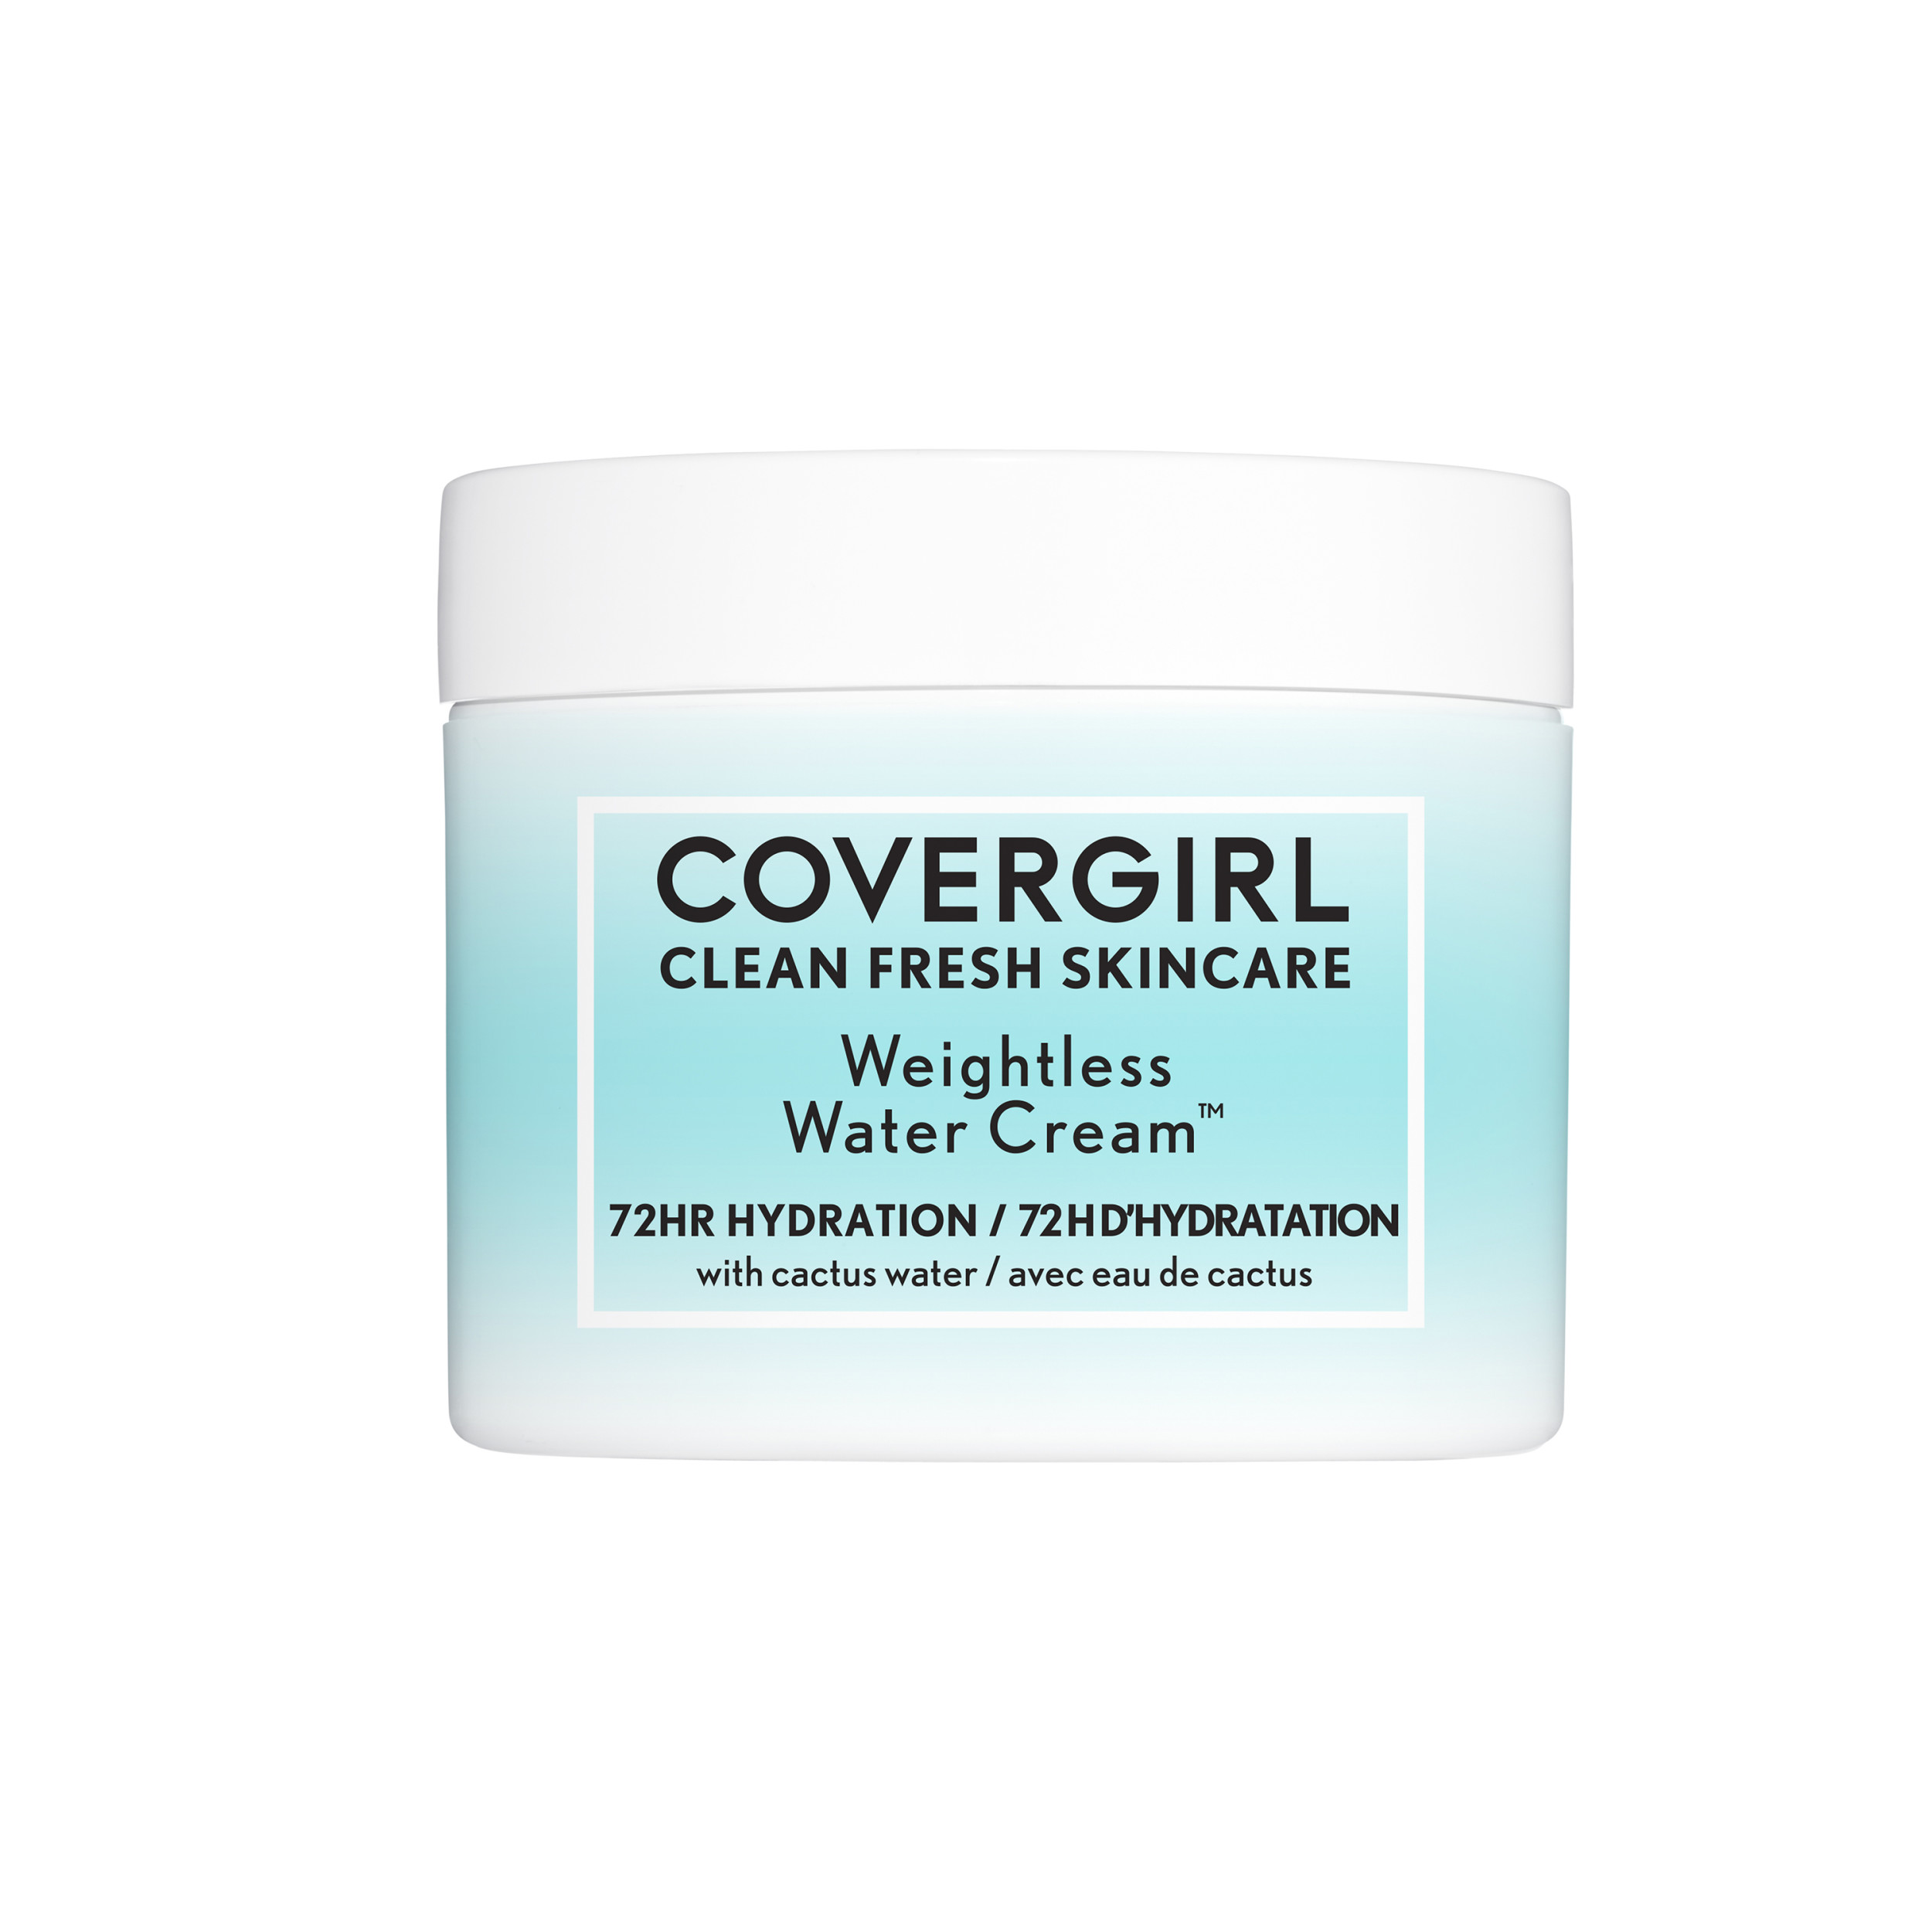 COVERGIRL Clean Fresh Skincare Weightless Water Cream Face Moisturizer, 2.0 fl oz - image 1 of 11